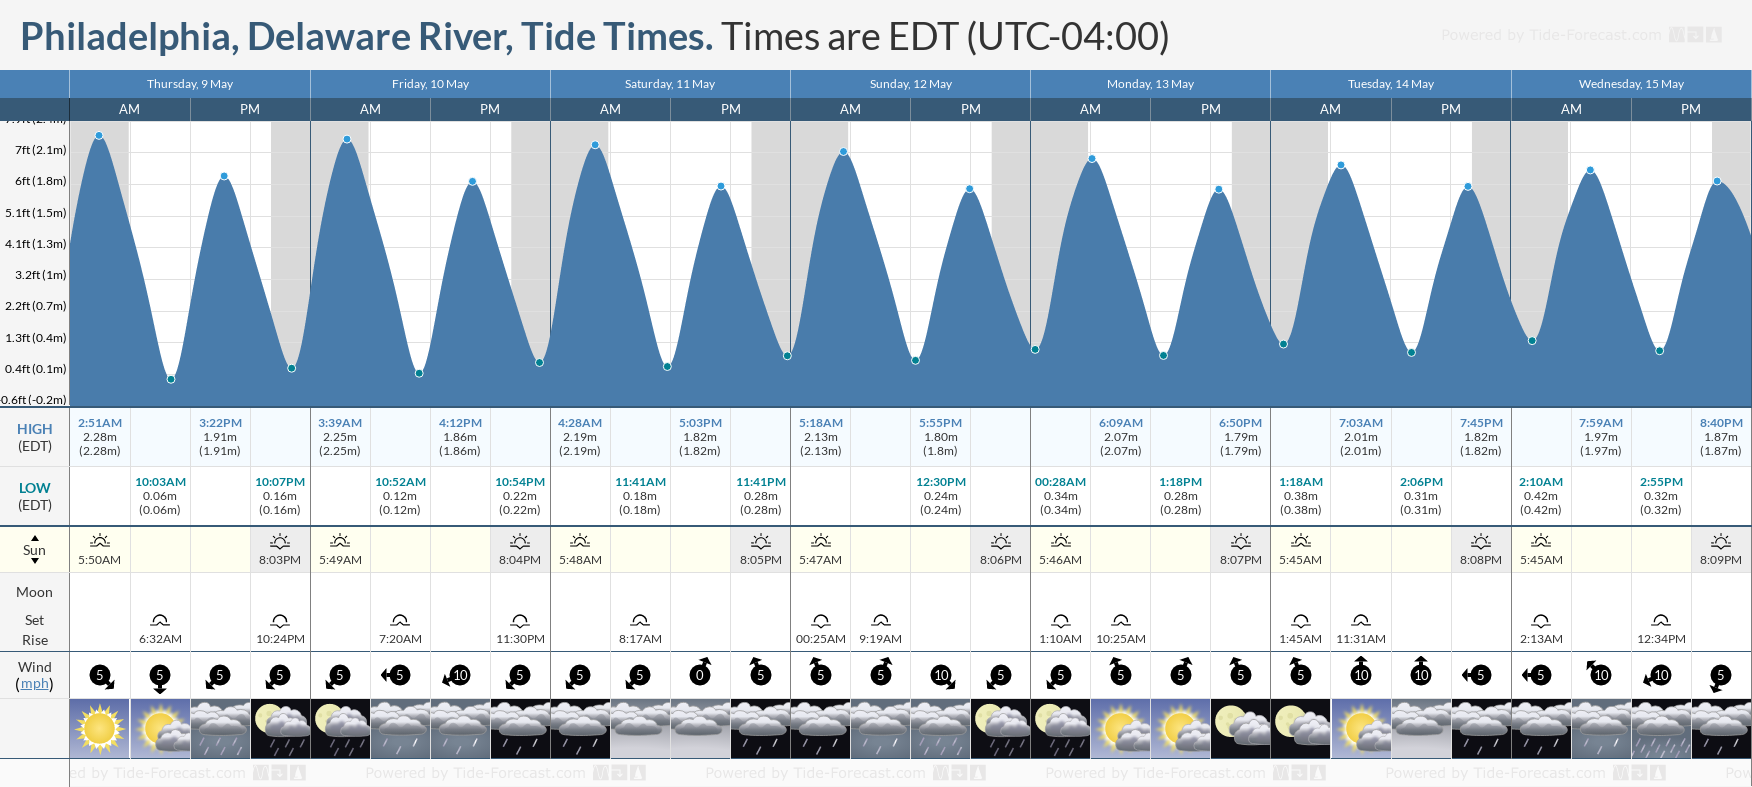 Philadelphia, Delaware River Tide Chart including high and low tide tide times for the next 7 days